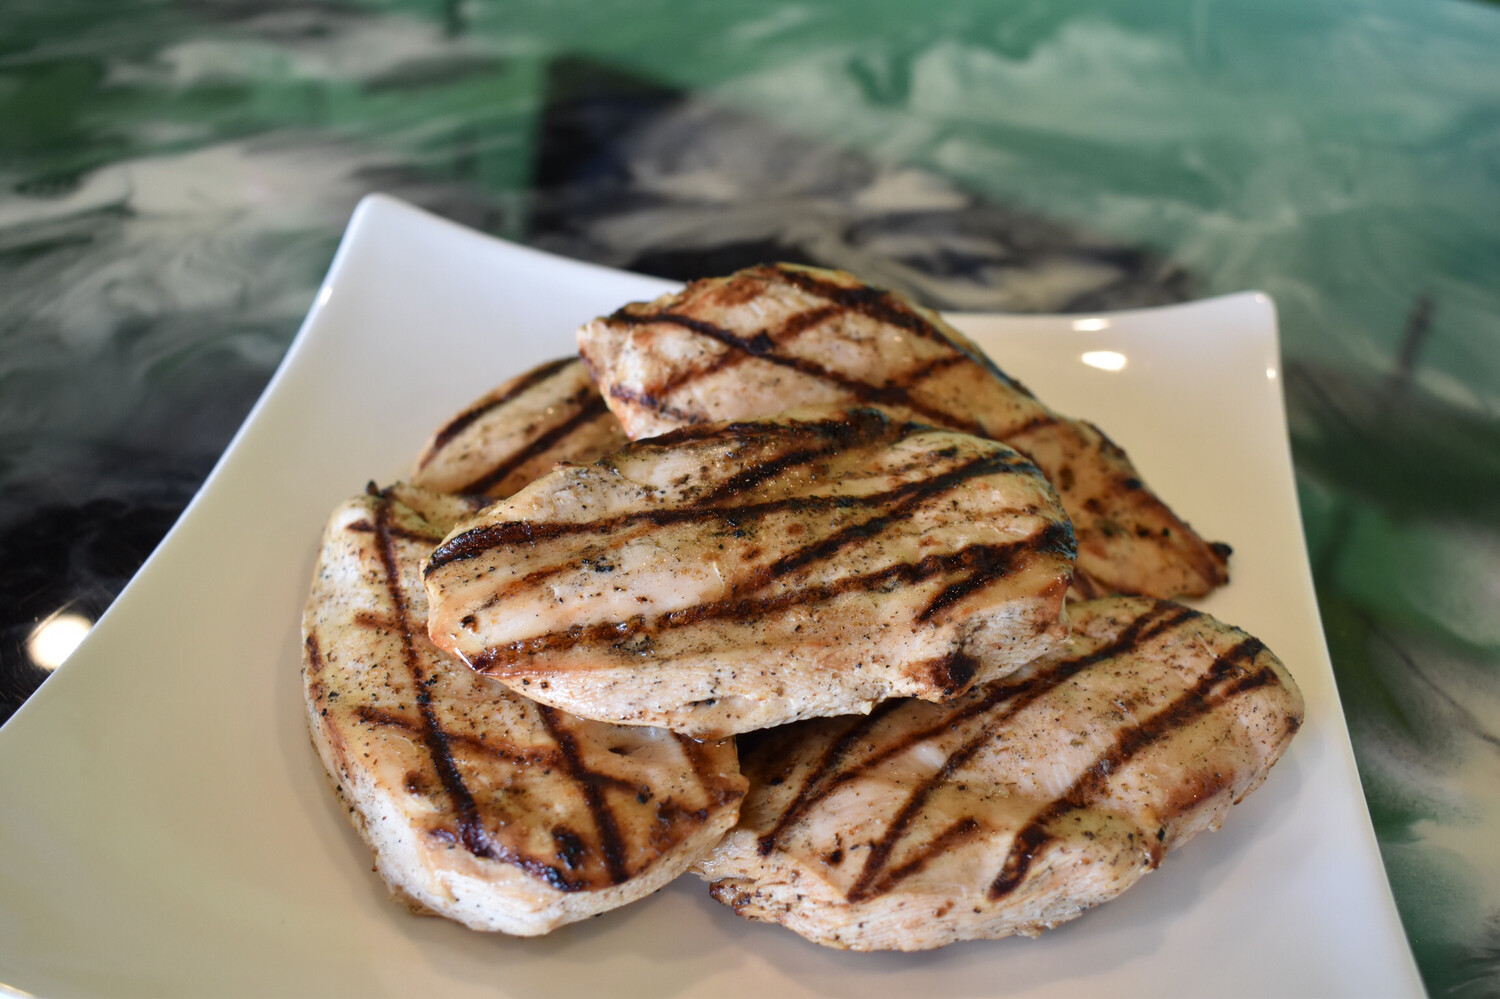 Chiavetta's Marinated Grilled Chicken - 1 Lb.